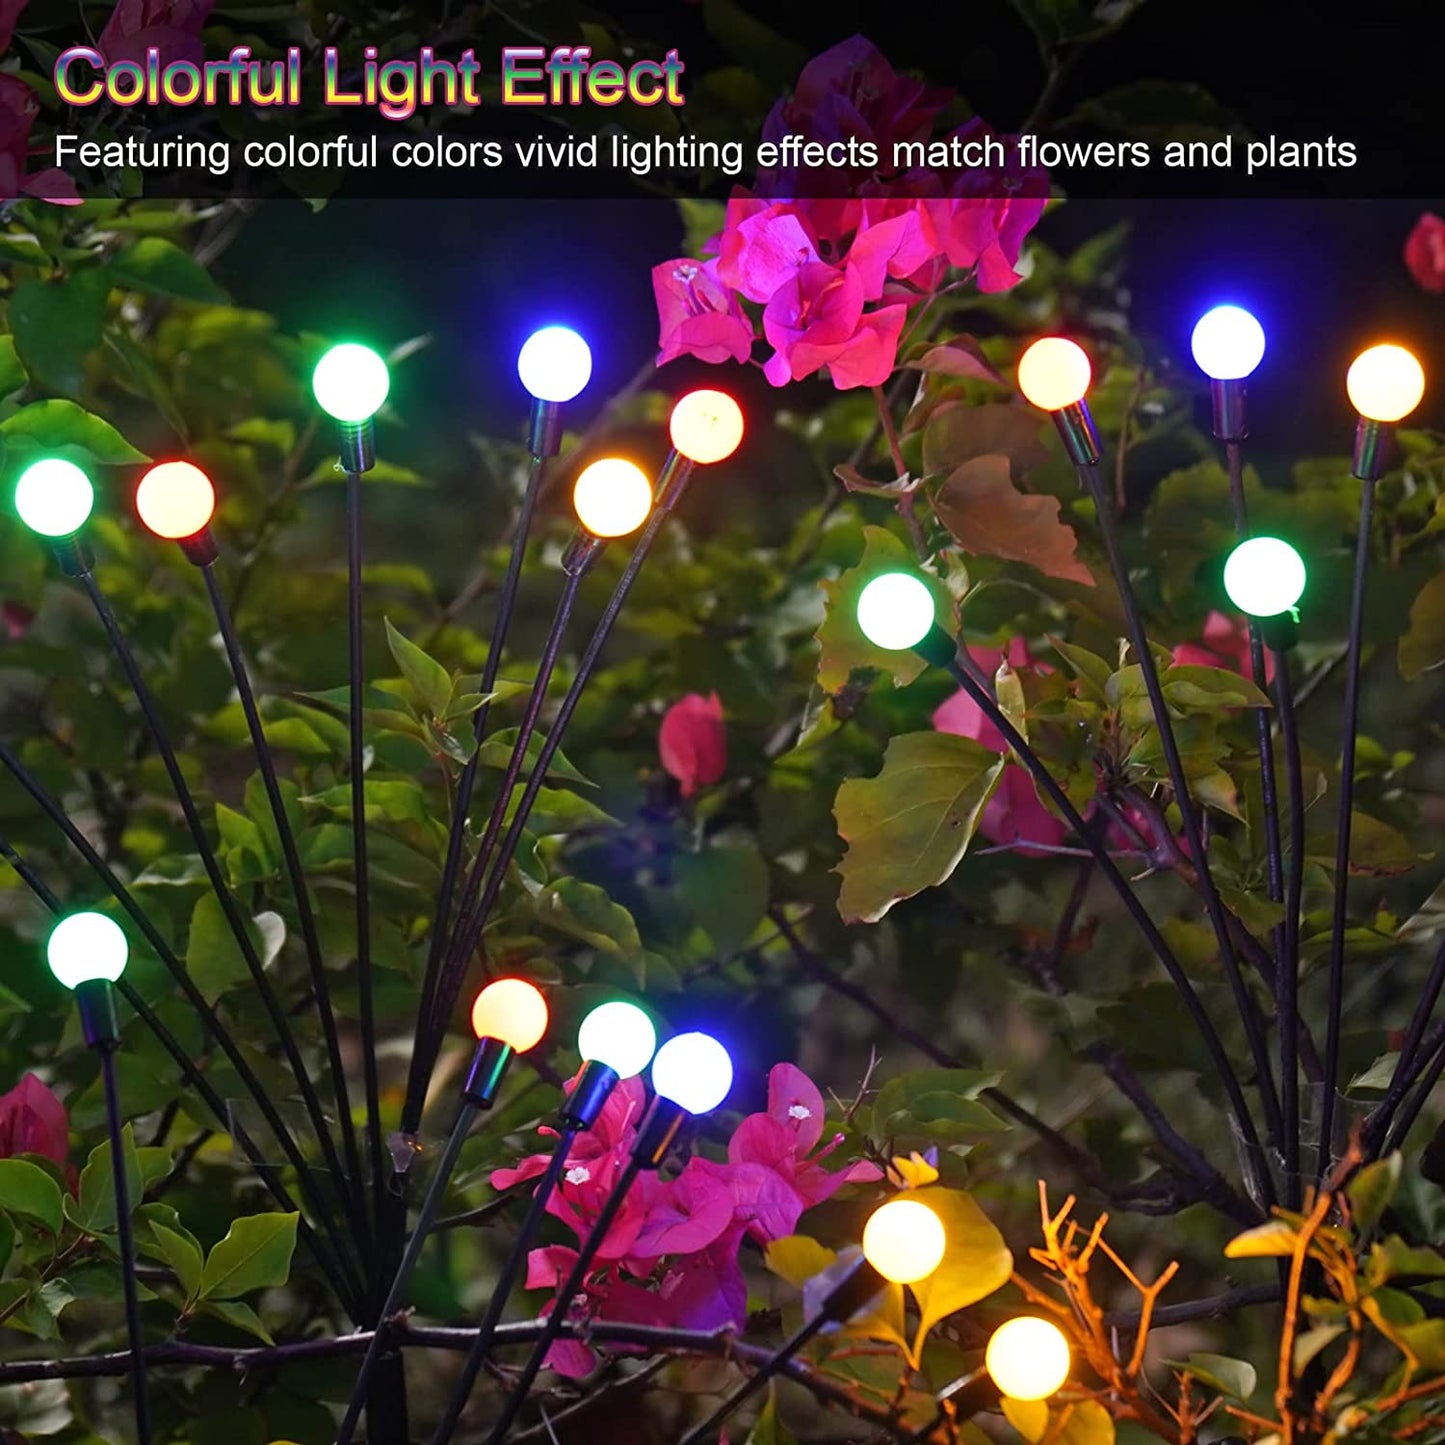 8Pack Solar Firefly Light, Colonul Light Efiect Featuring colorful colors vivid lighting effects